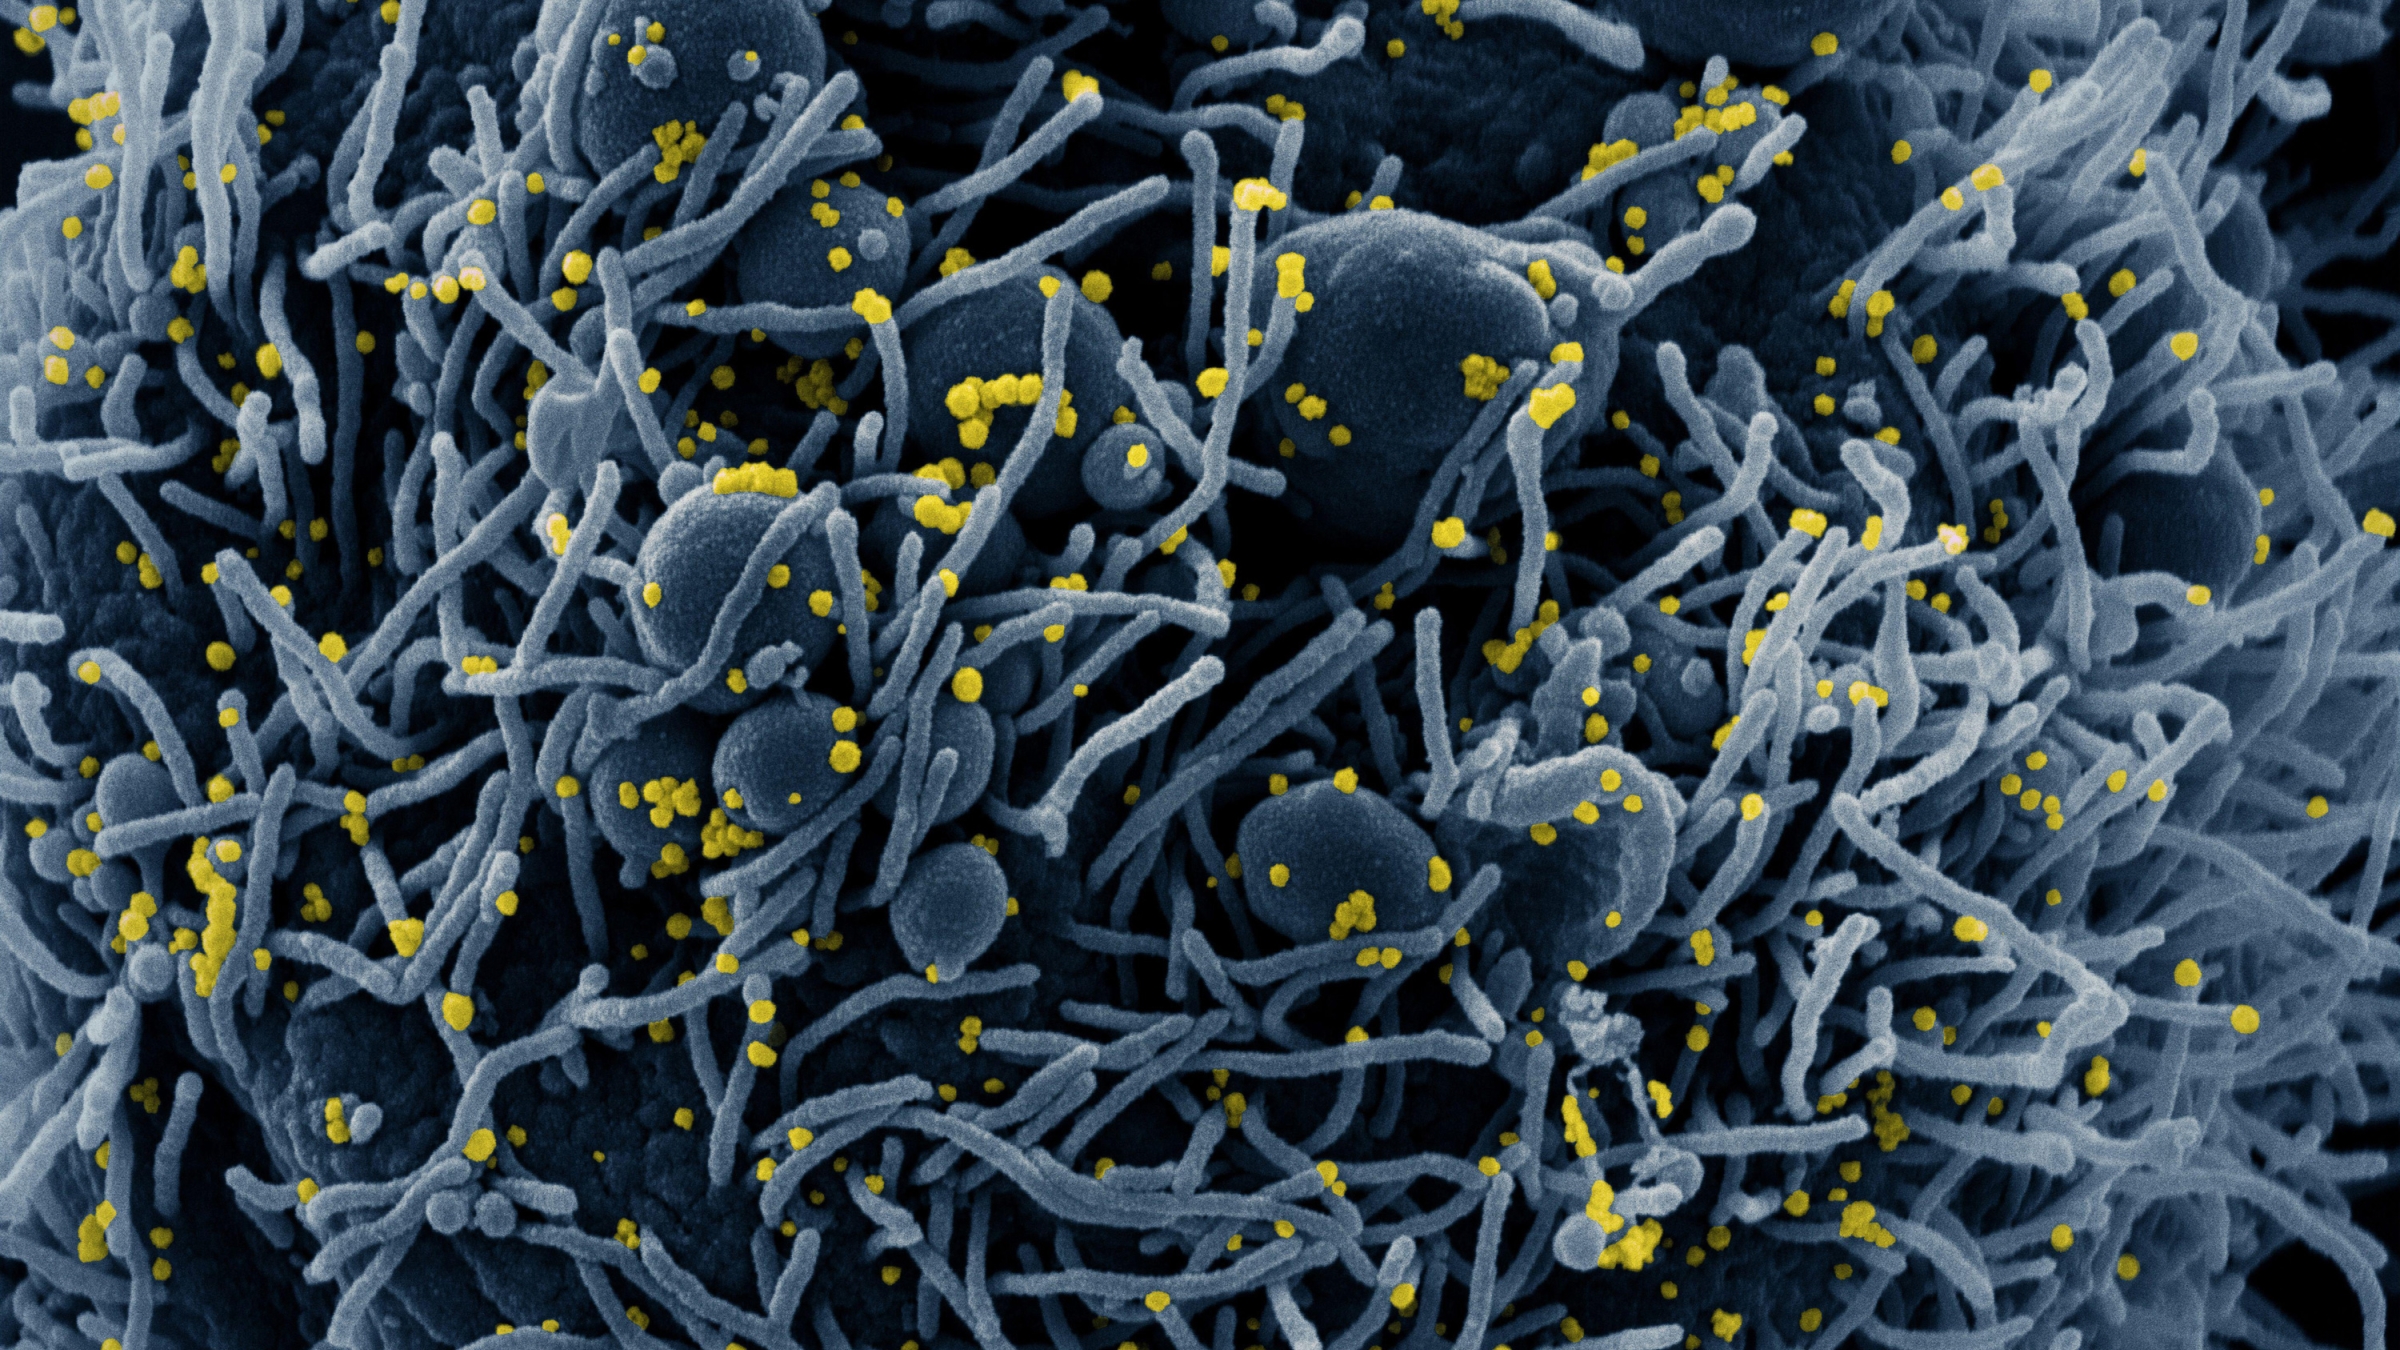 Novel Coronavirus SARS-CoV-2 colorized scanning electron micrograph of an apoptotic cell (blue) infected with SARS-CoV-2 virus particles (yellow), isolated from a patient sample. Phanie / Alamy